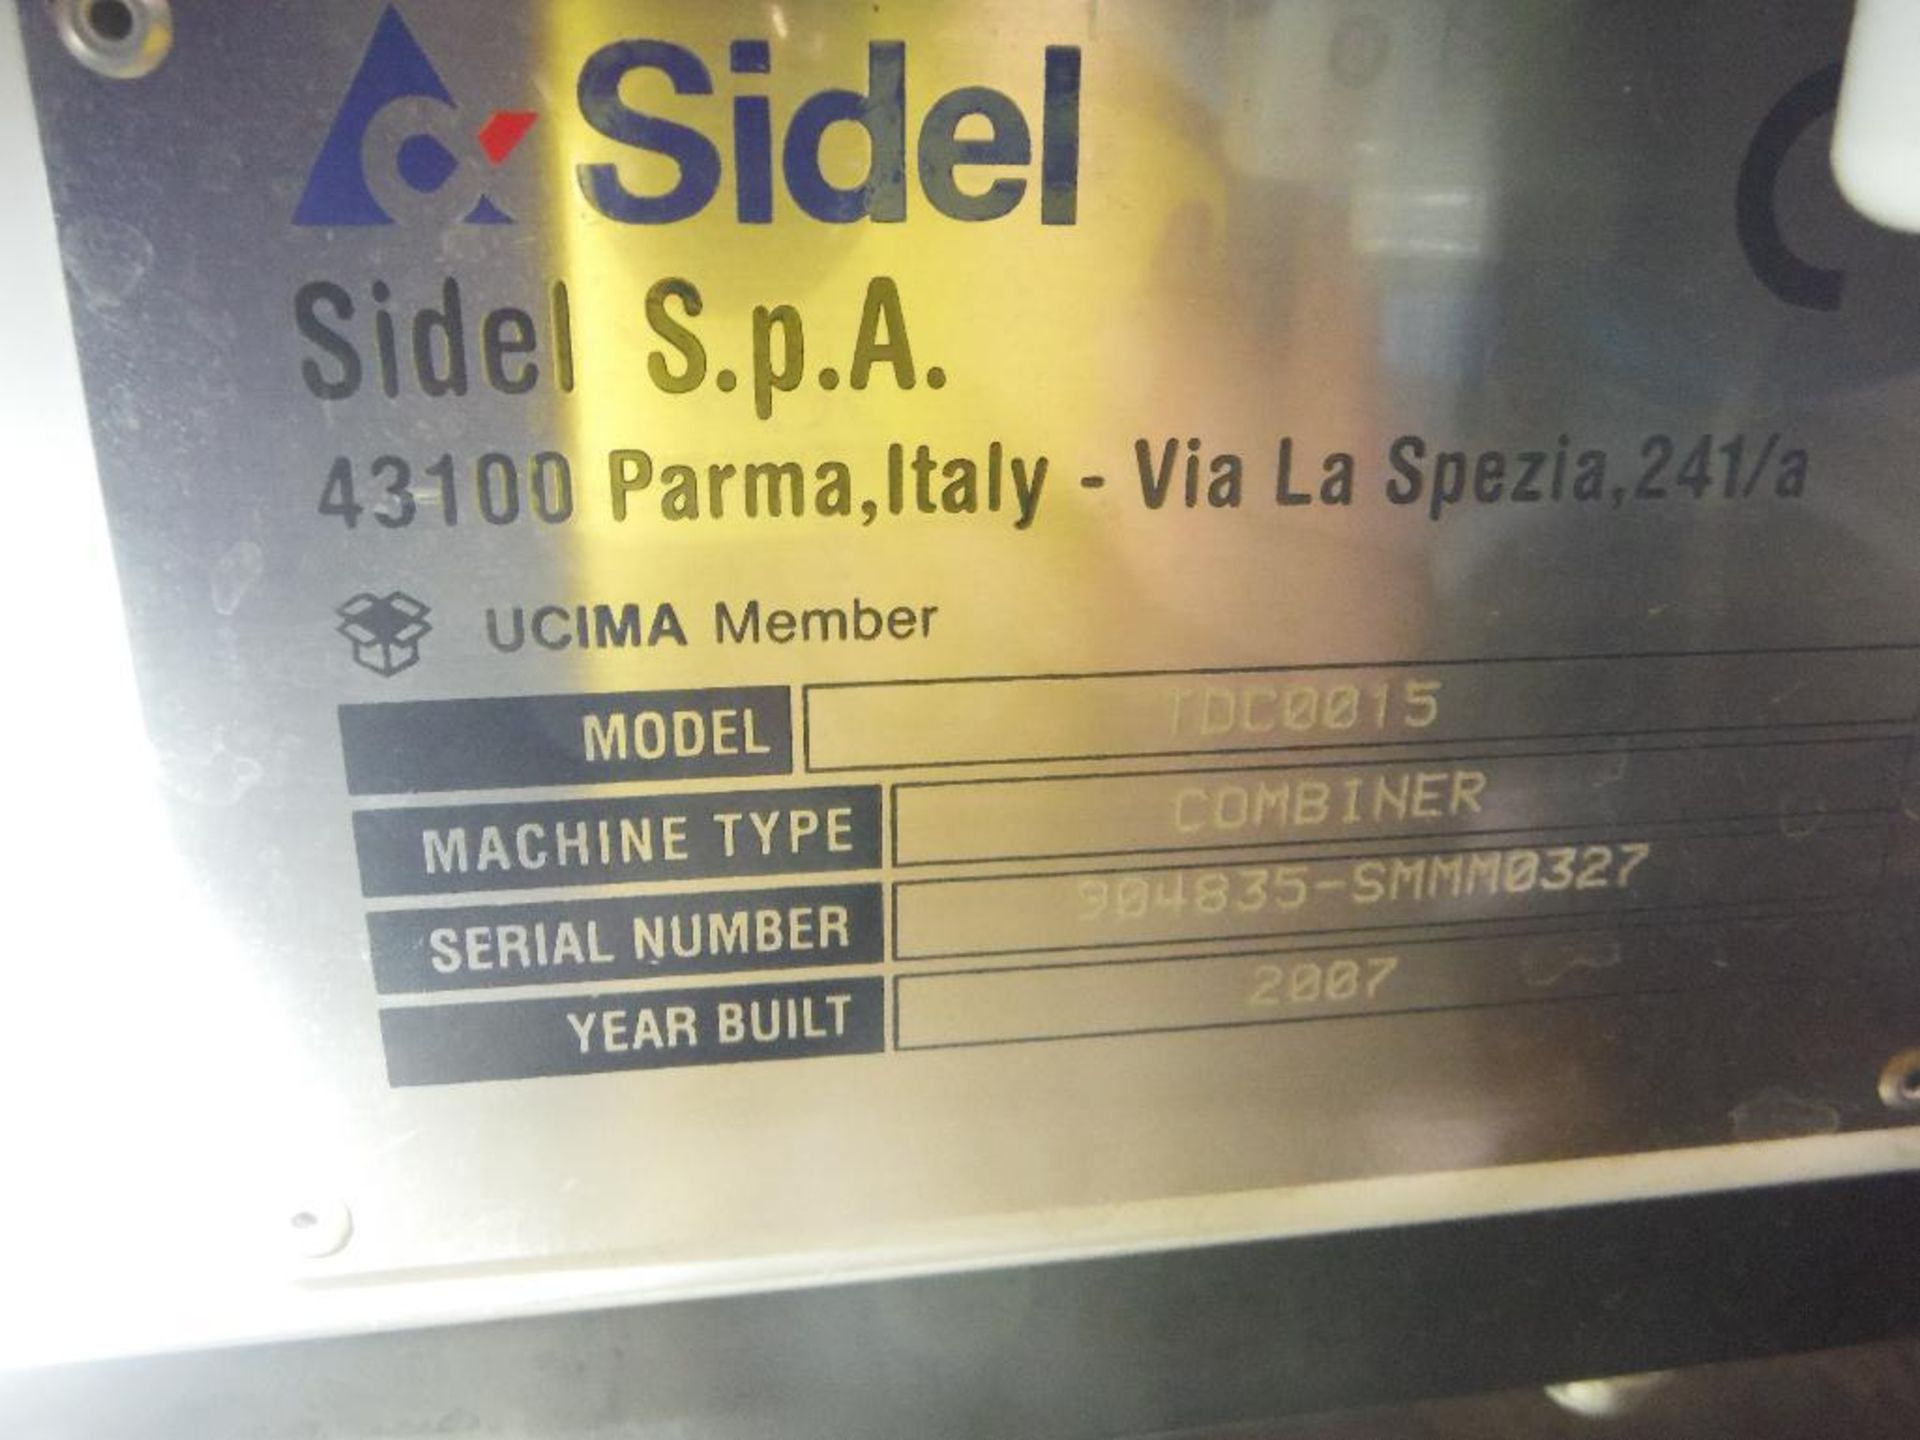 2007 Sidel combiner conveyor, Model TDC0015, SN 904835-SMMM0327, 98 in. long x 66 in. wide, with con - Bild 8 aus 9